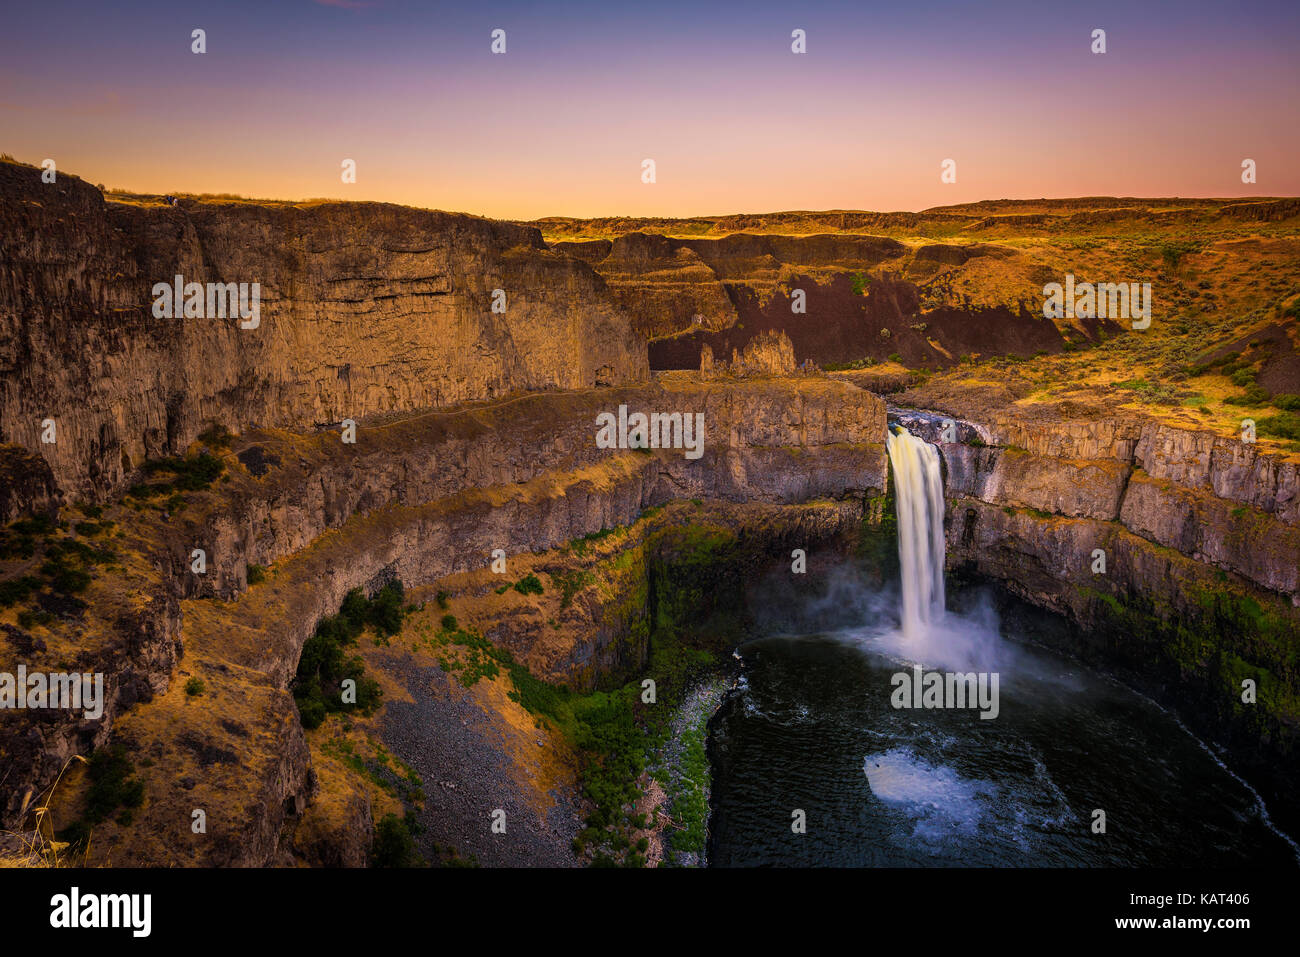 Palouse Falls  on the Palouse River in Washington state, USA, photographed at sunset Stock Photo